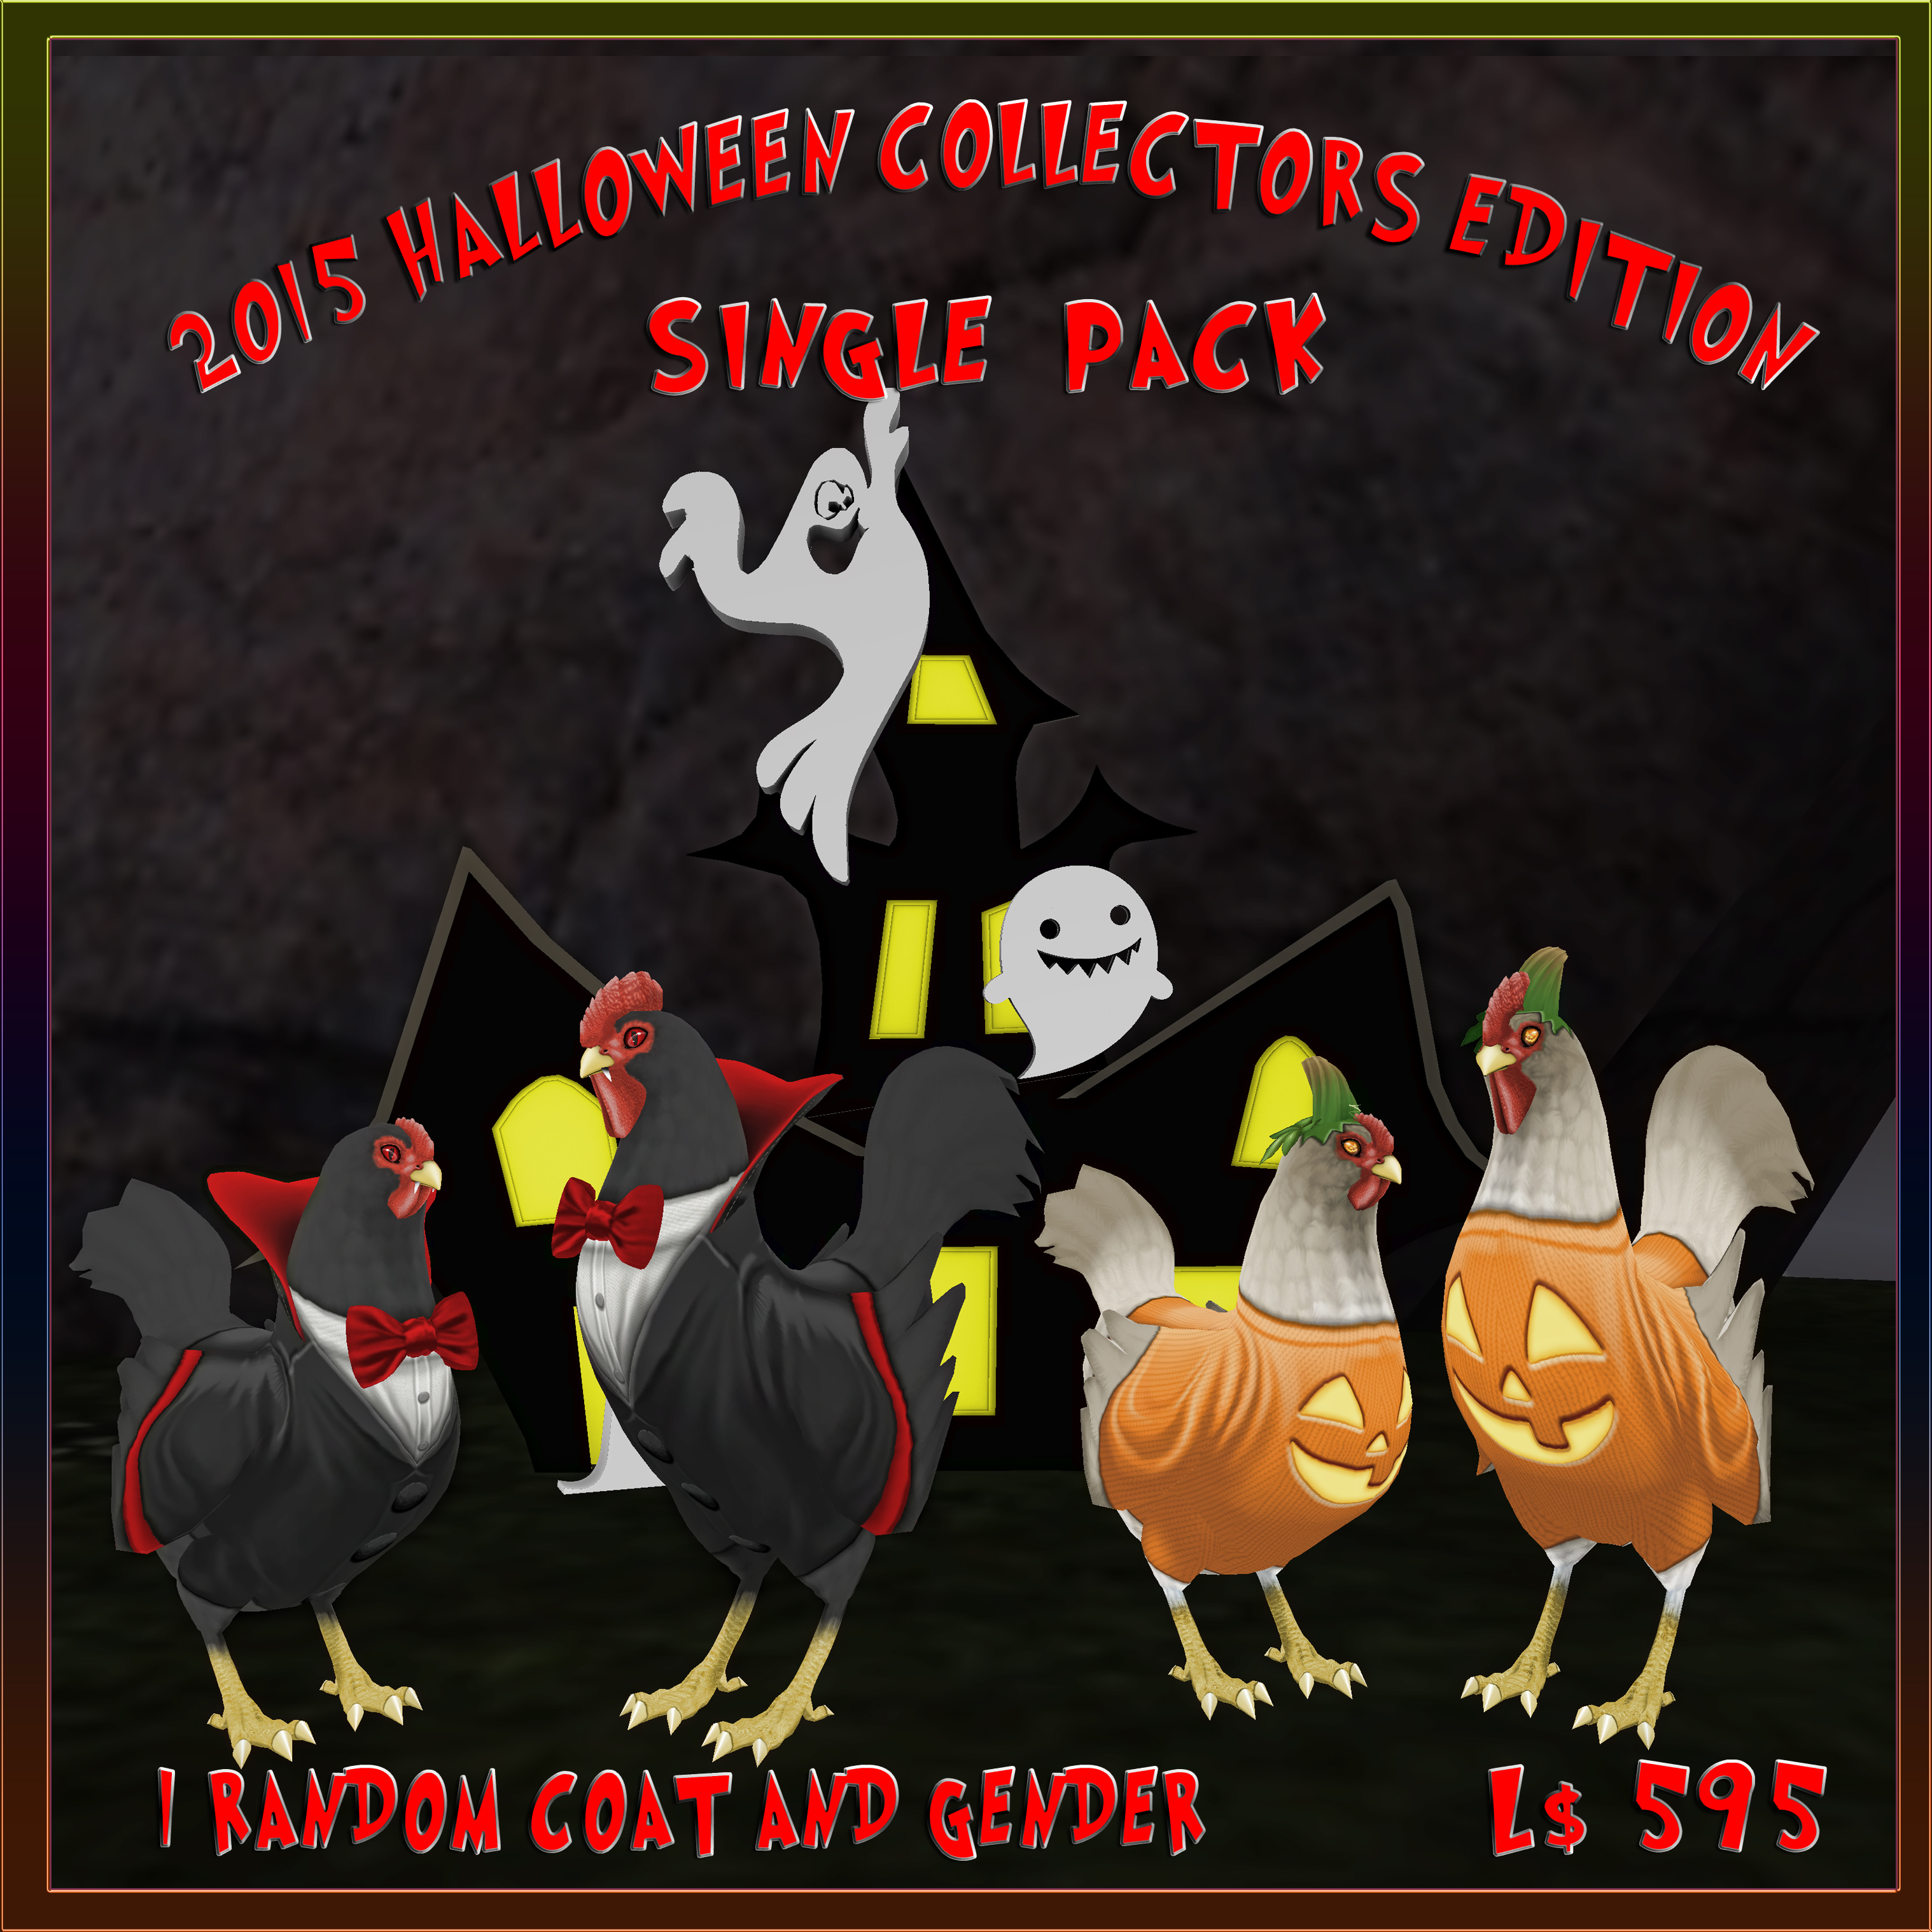 2015 Halloween Collectors Edition - Single Pack